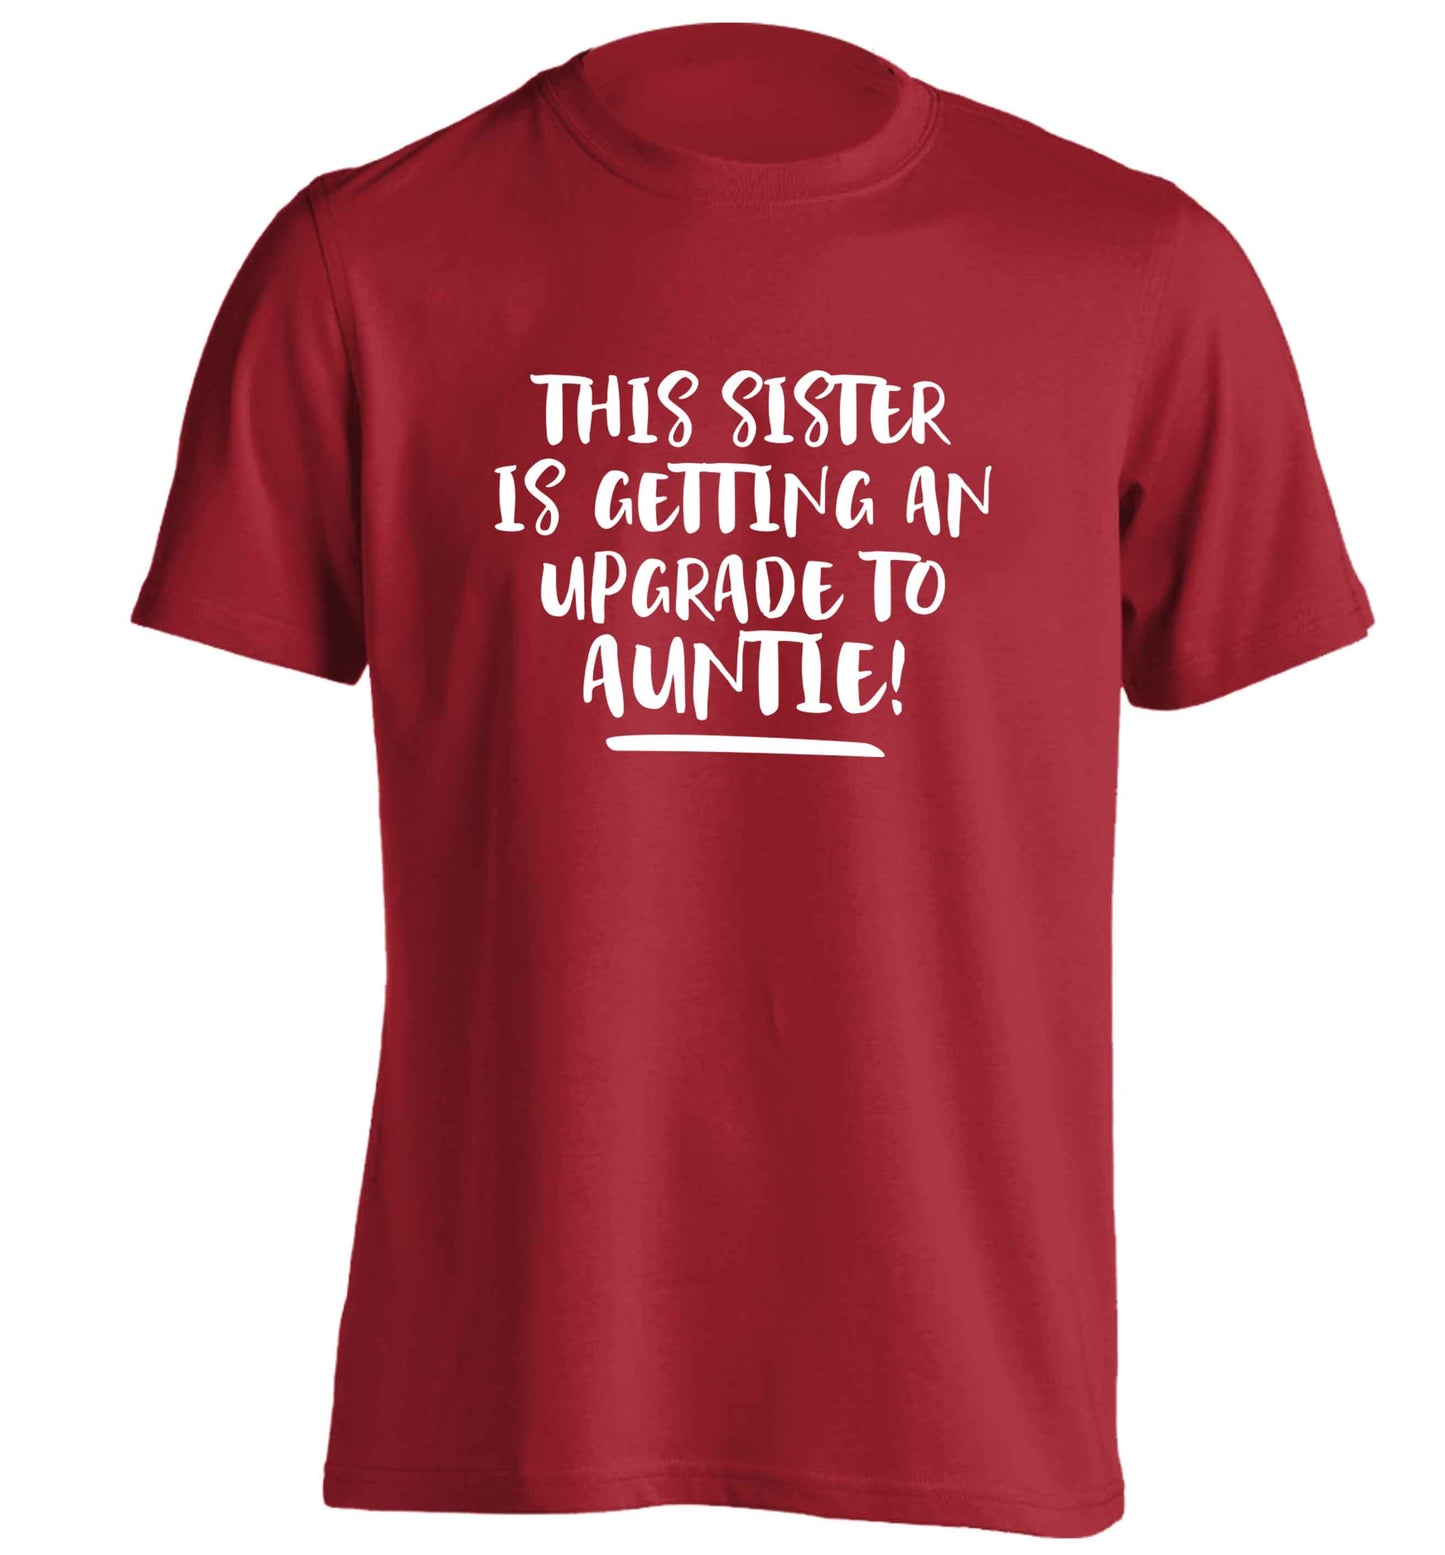 This sister is getting an upgrade to auntie! adults unisex red Tshirt 2XL